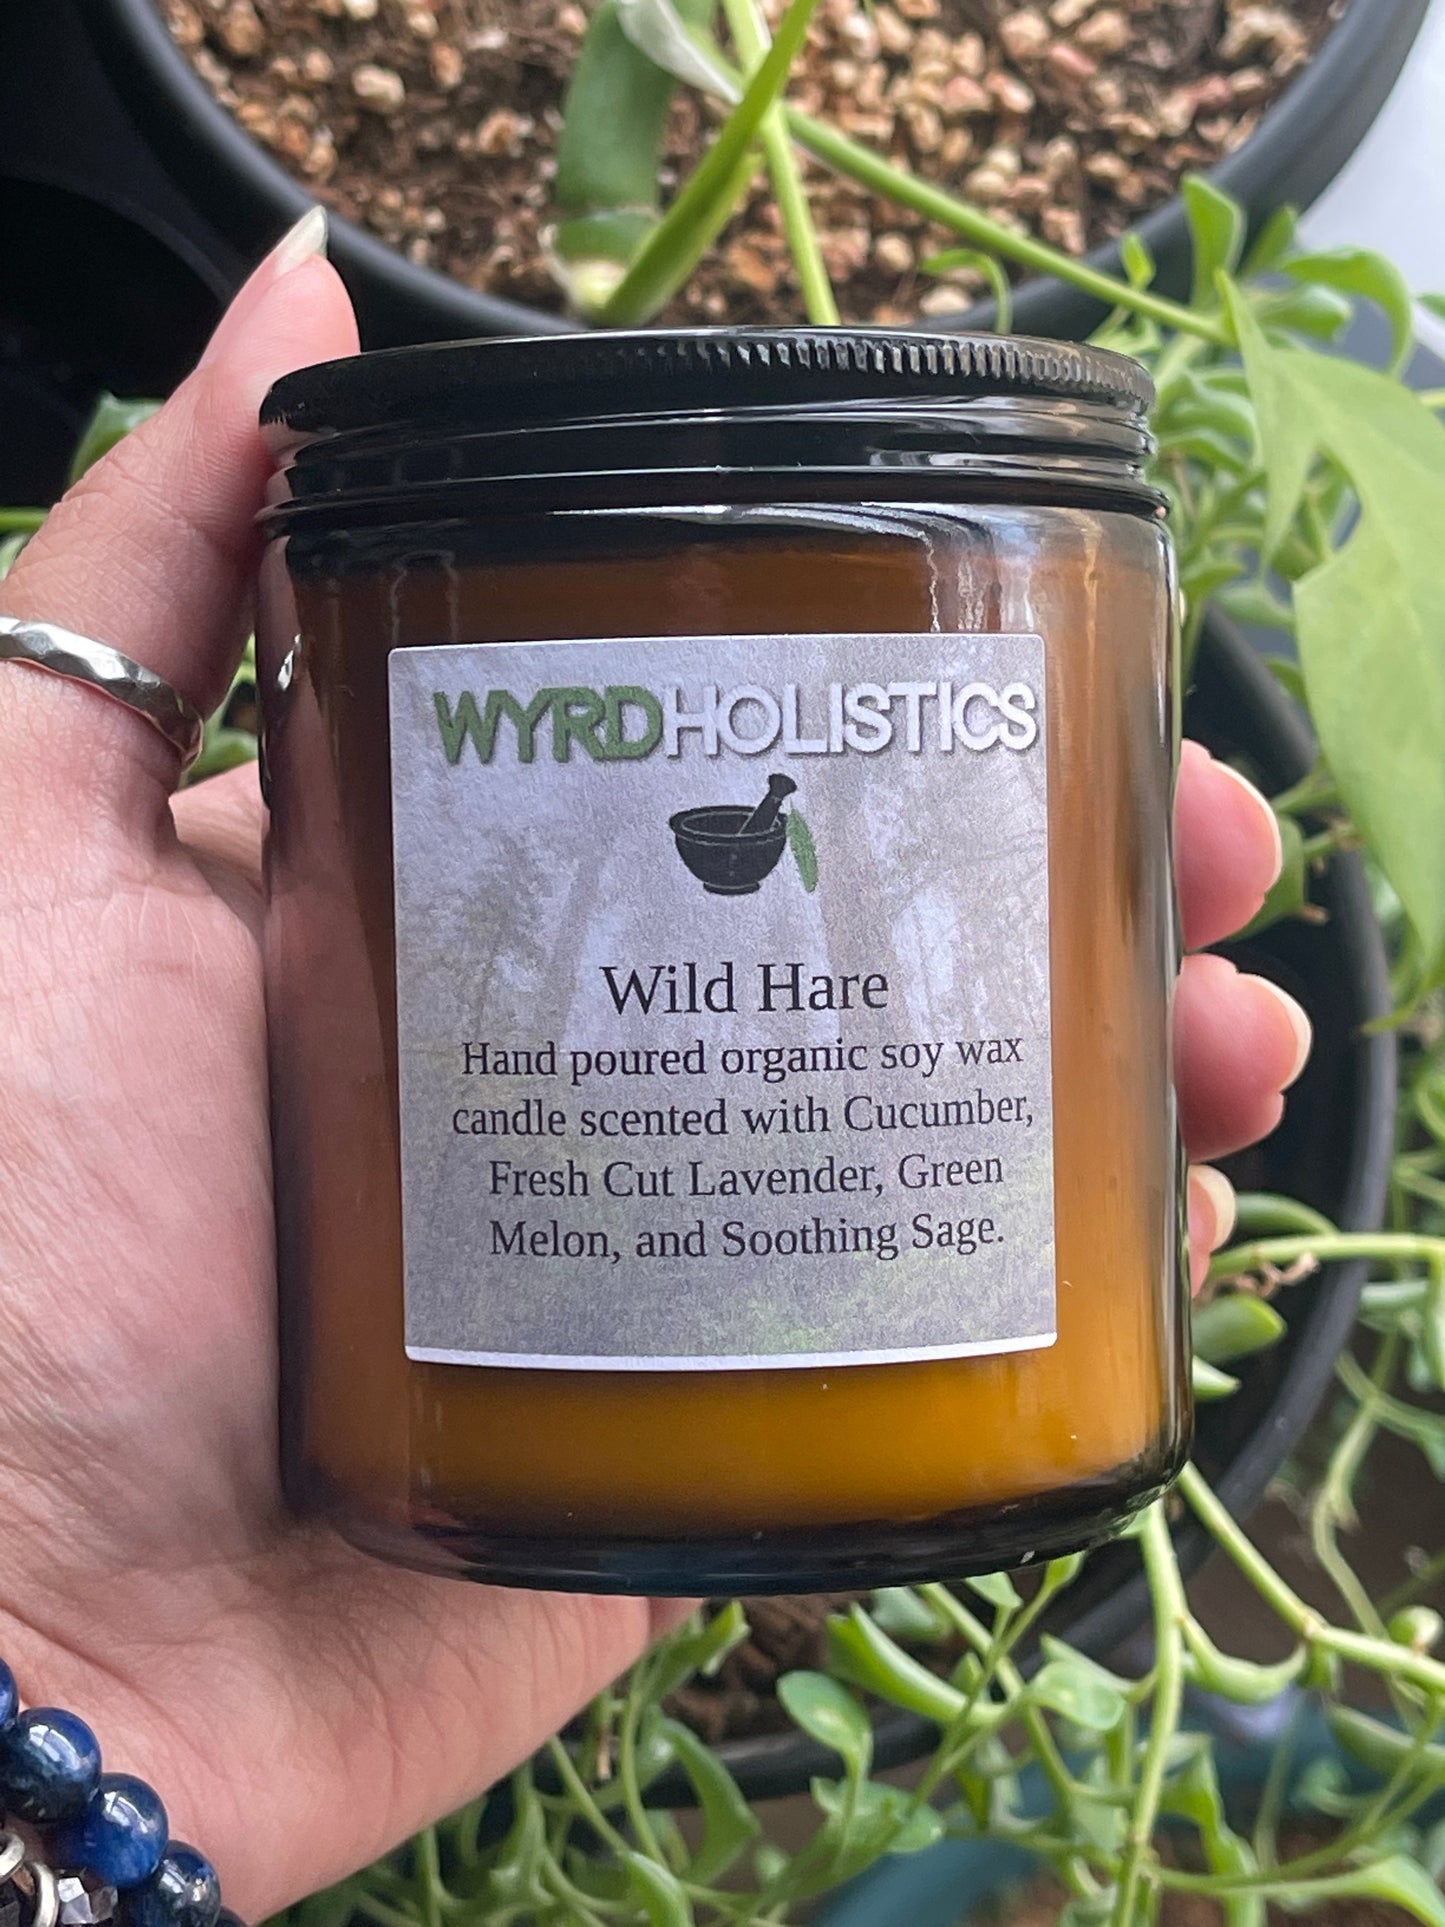 Wild Hare Organic Soy Wax Candle